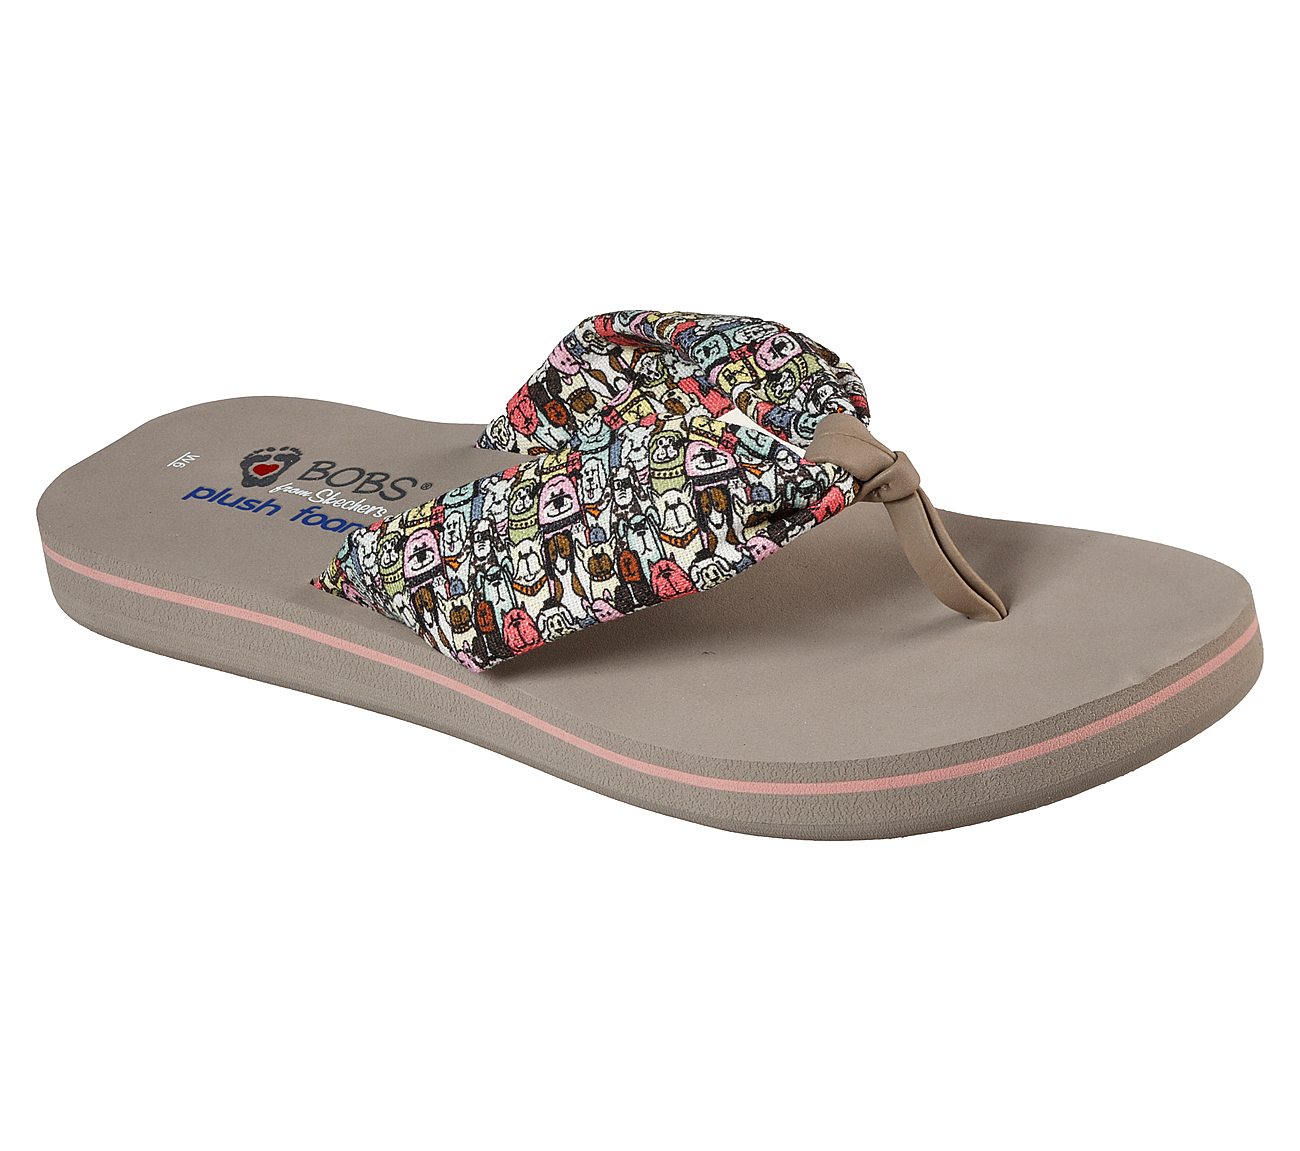 BOBS SUNSET - ENDLESS BEACH, TAUPE/MULTI Footwear Lateral View